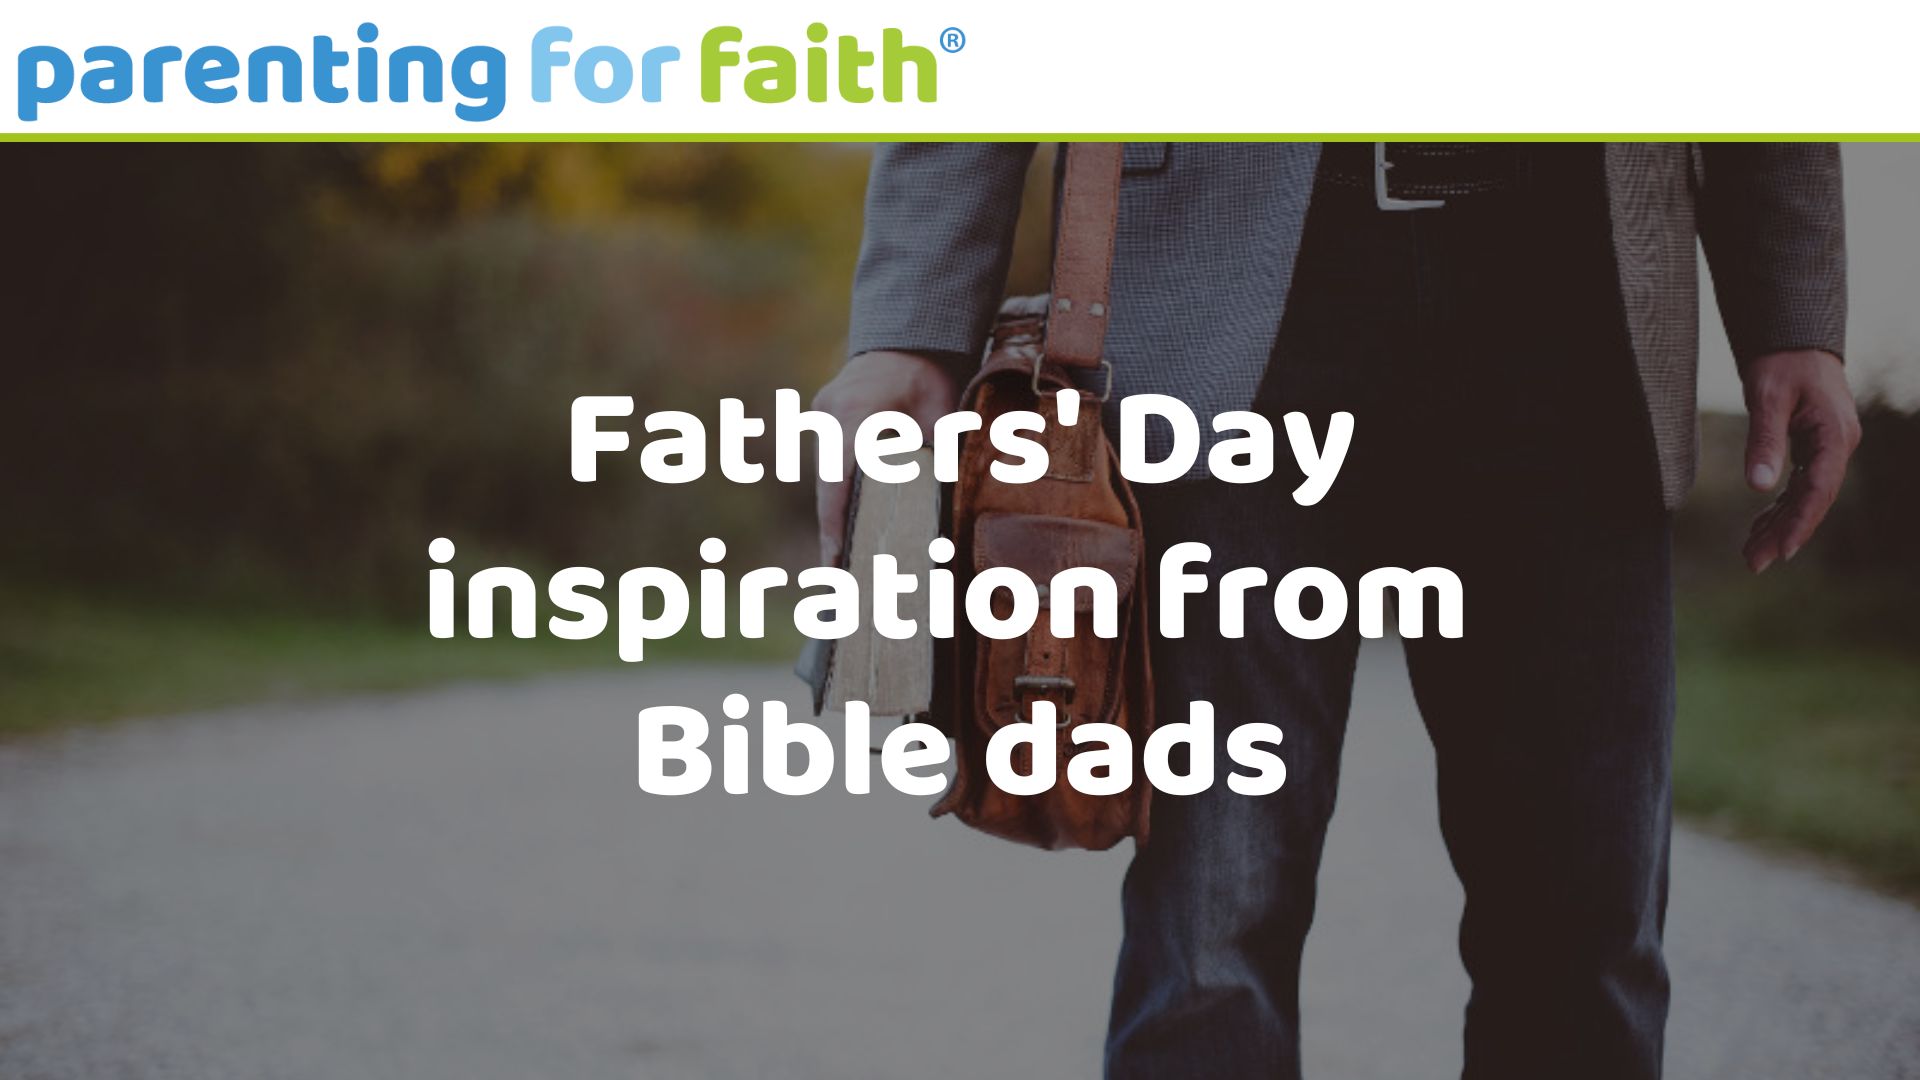 Fathers day inspiration from Bible dads